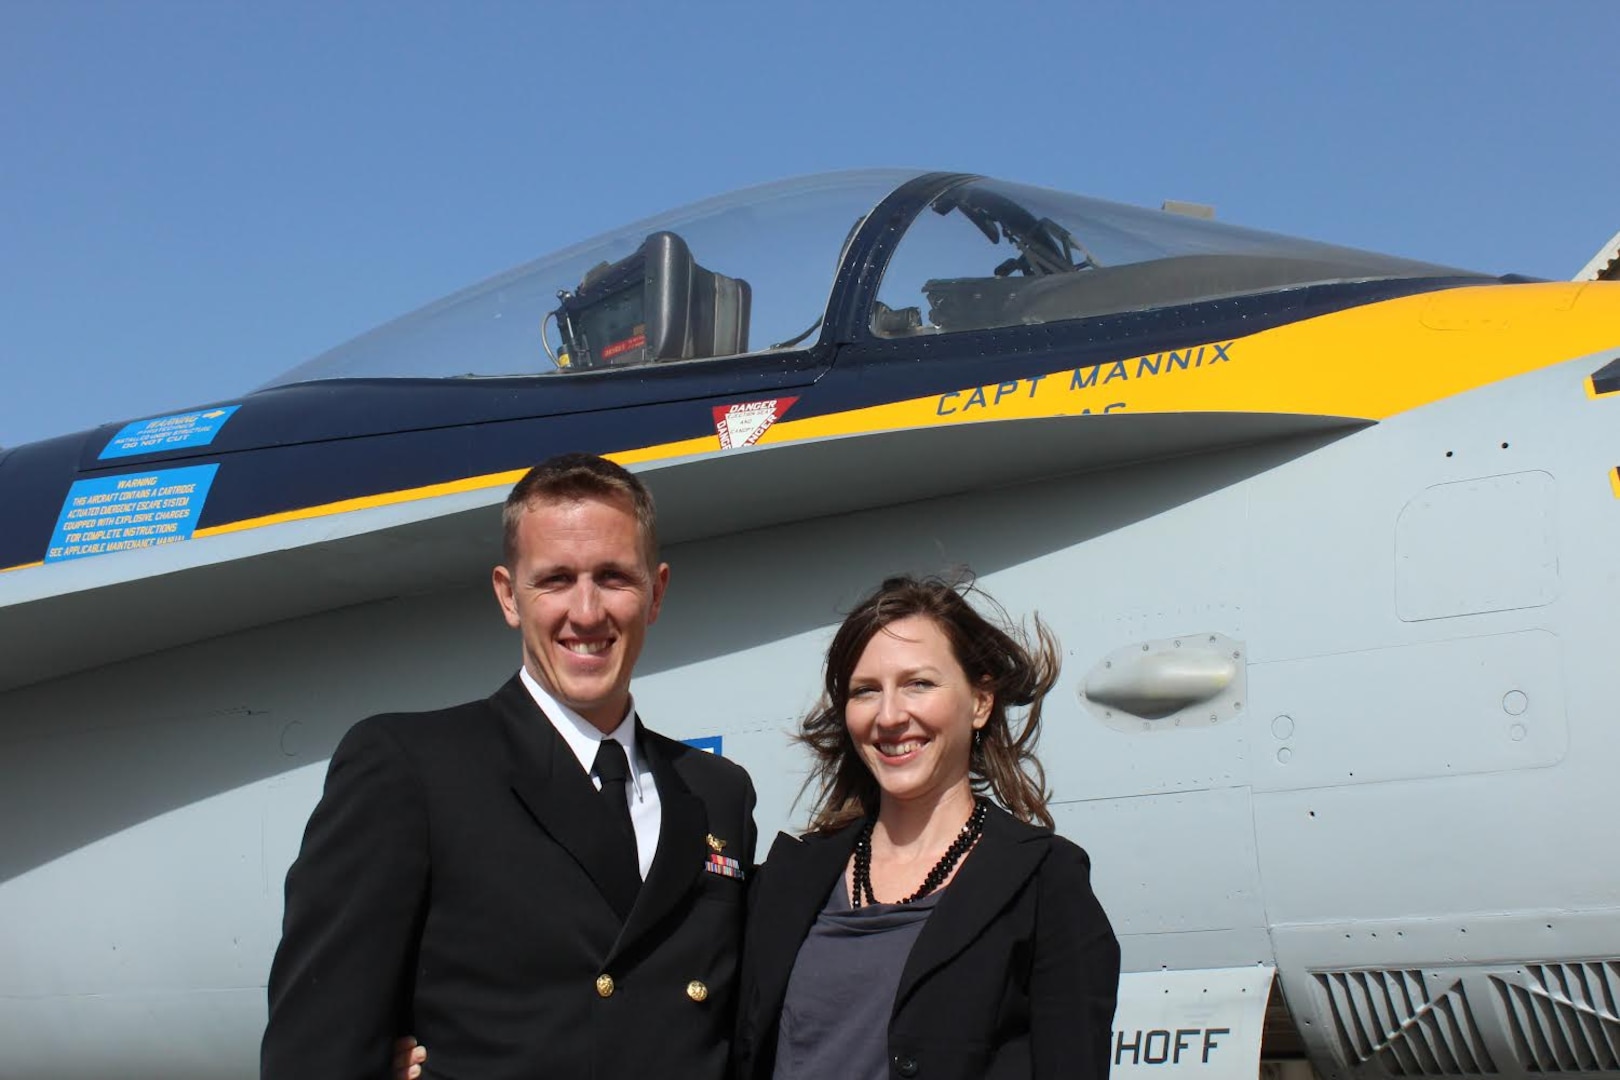 Man in uniform and woman in suit pose in front of an aircraft